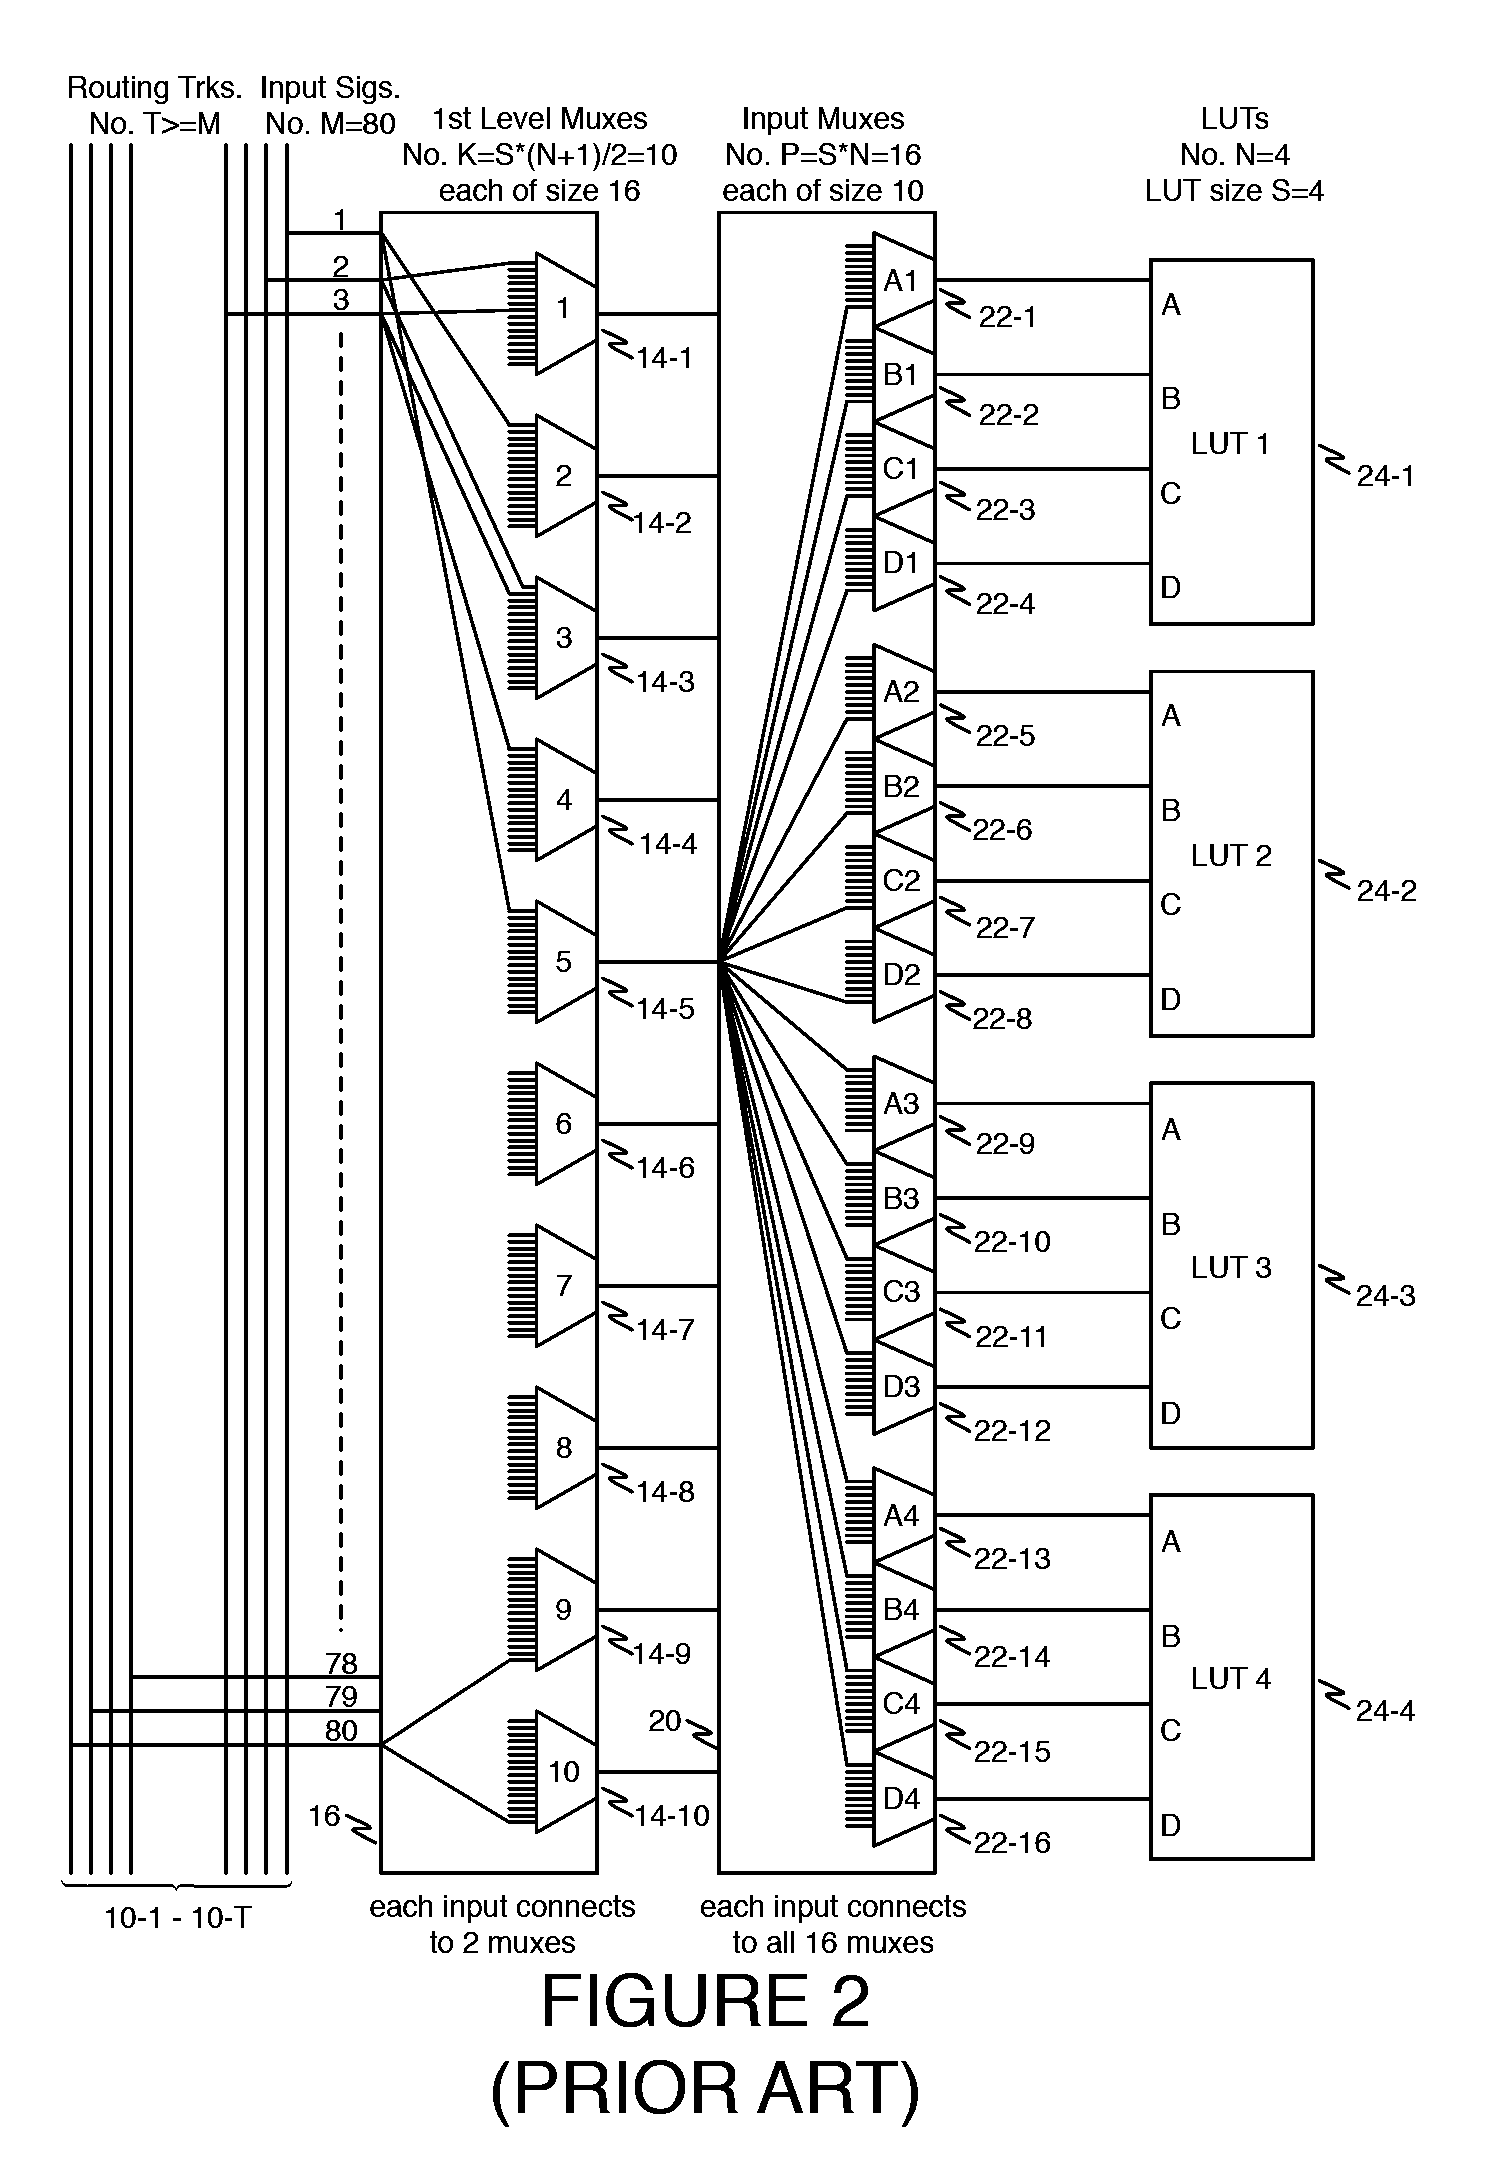 FPGA architecture having two-level cluster input interconnect scheme without bandwidth limitation